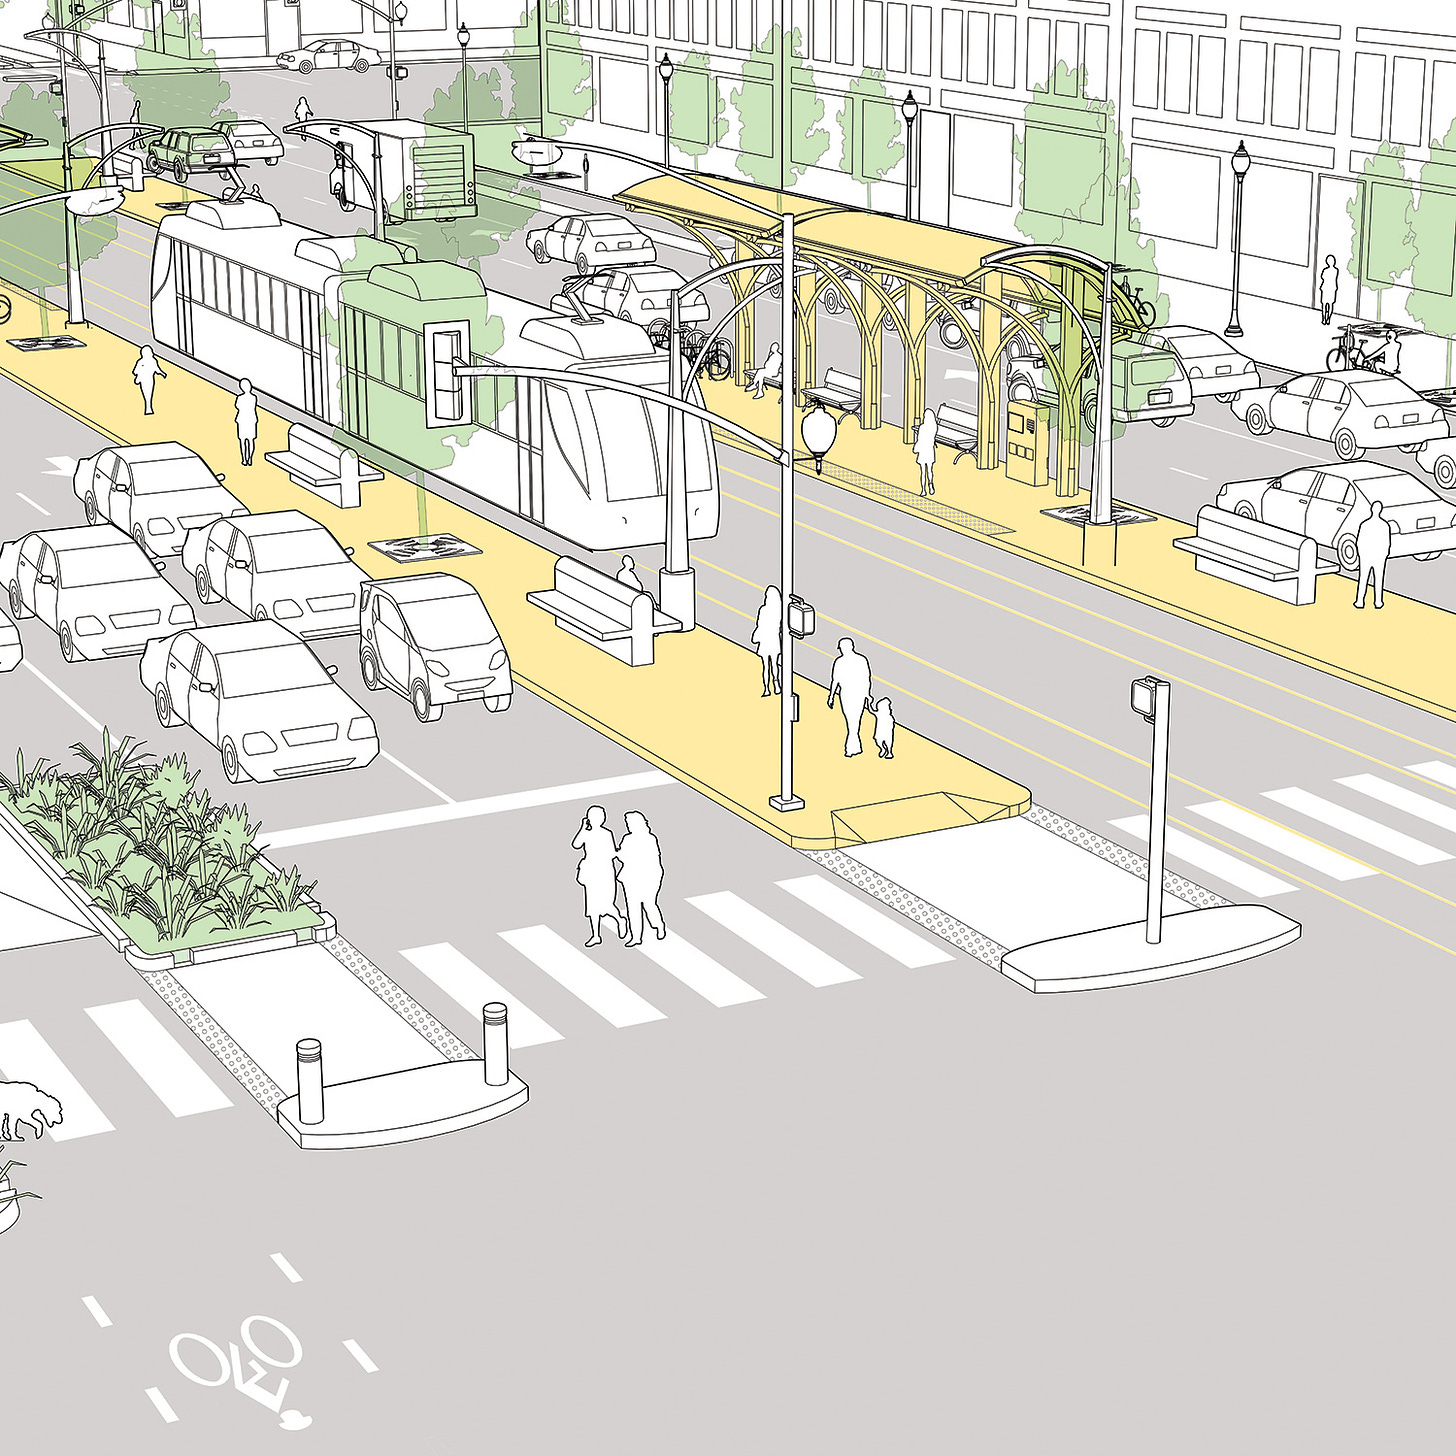 An illustration showing a transitway in the middle of a very wide four to five lane street with bike lanes at the edge. The entire cross section of the street is over 10 lanes wide.